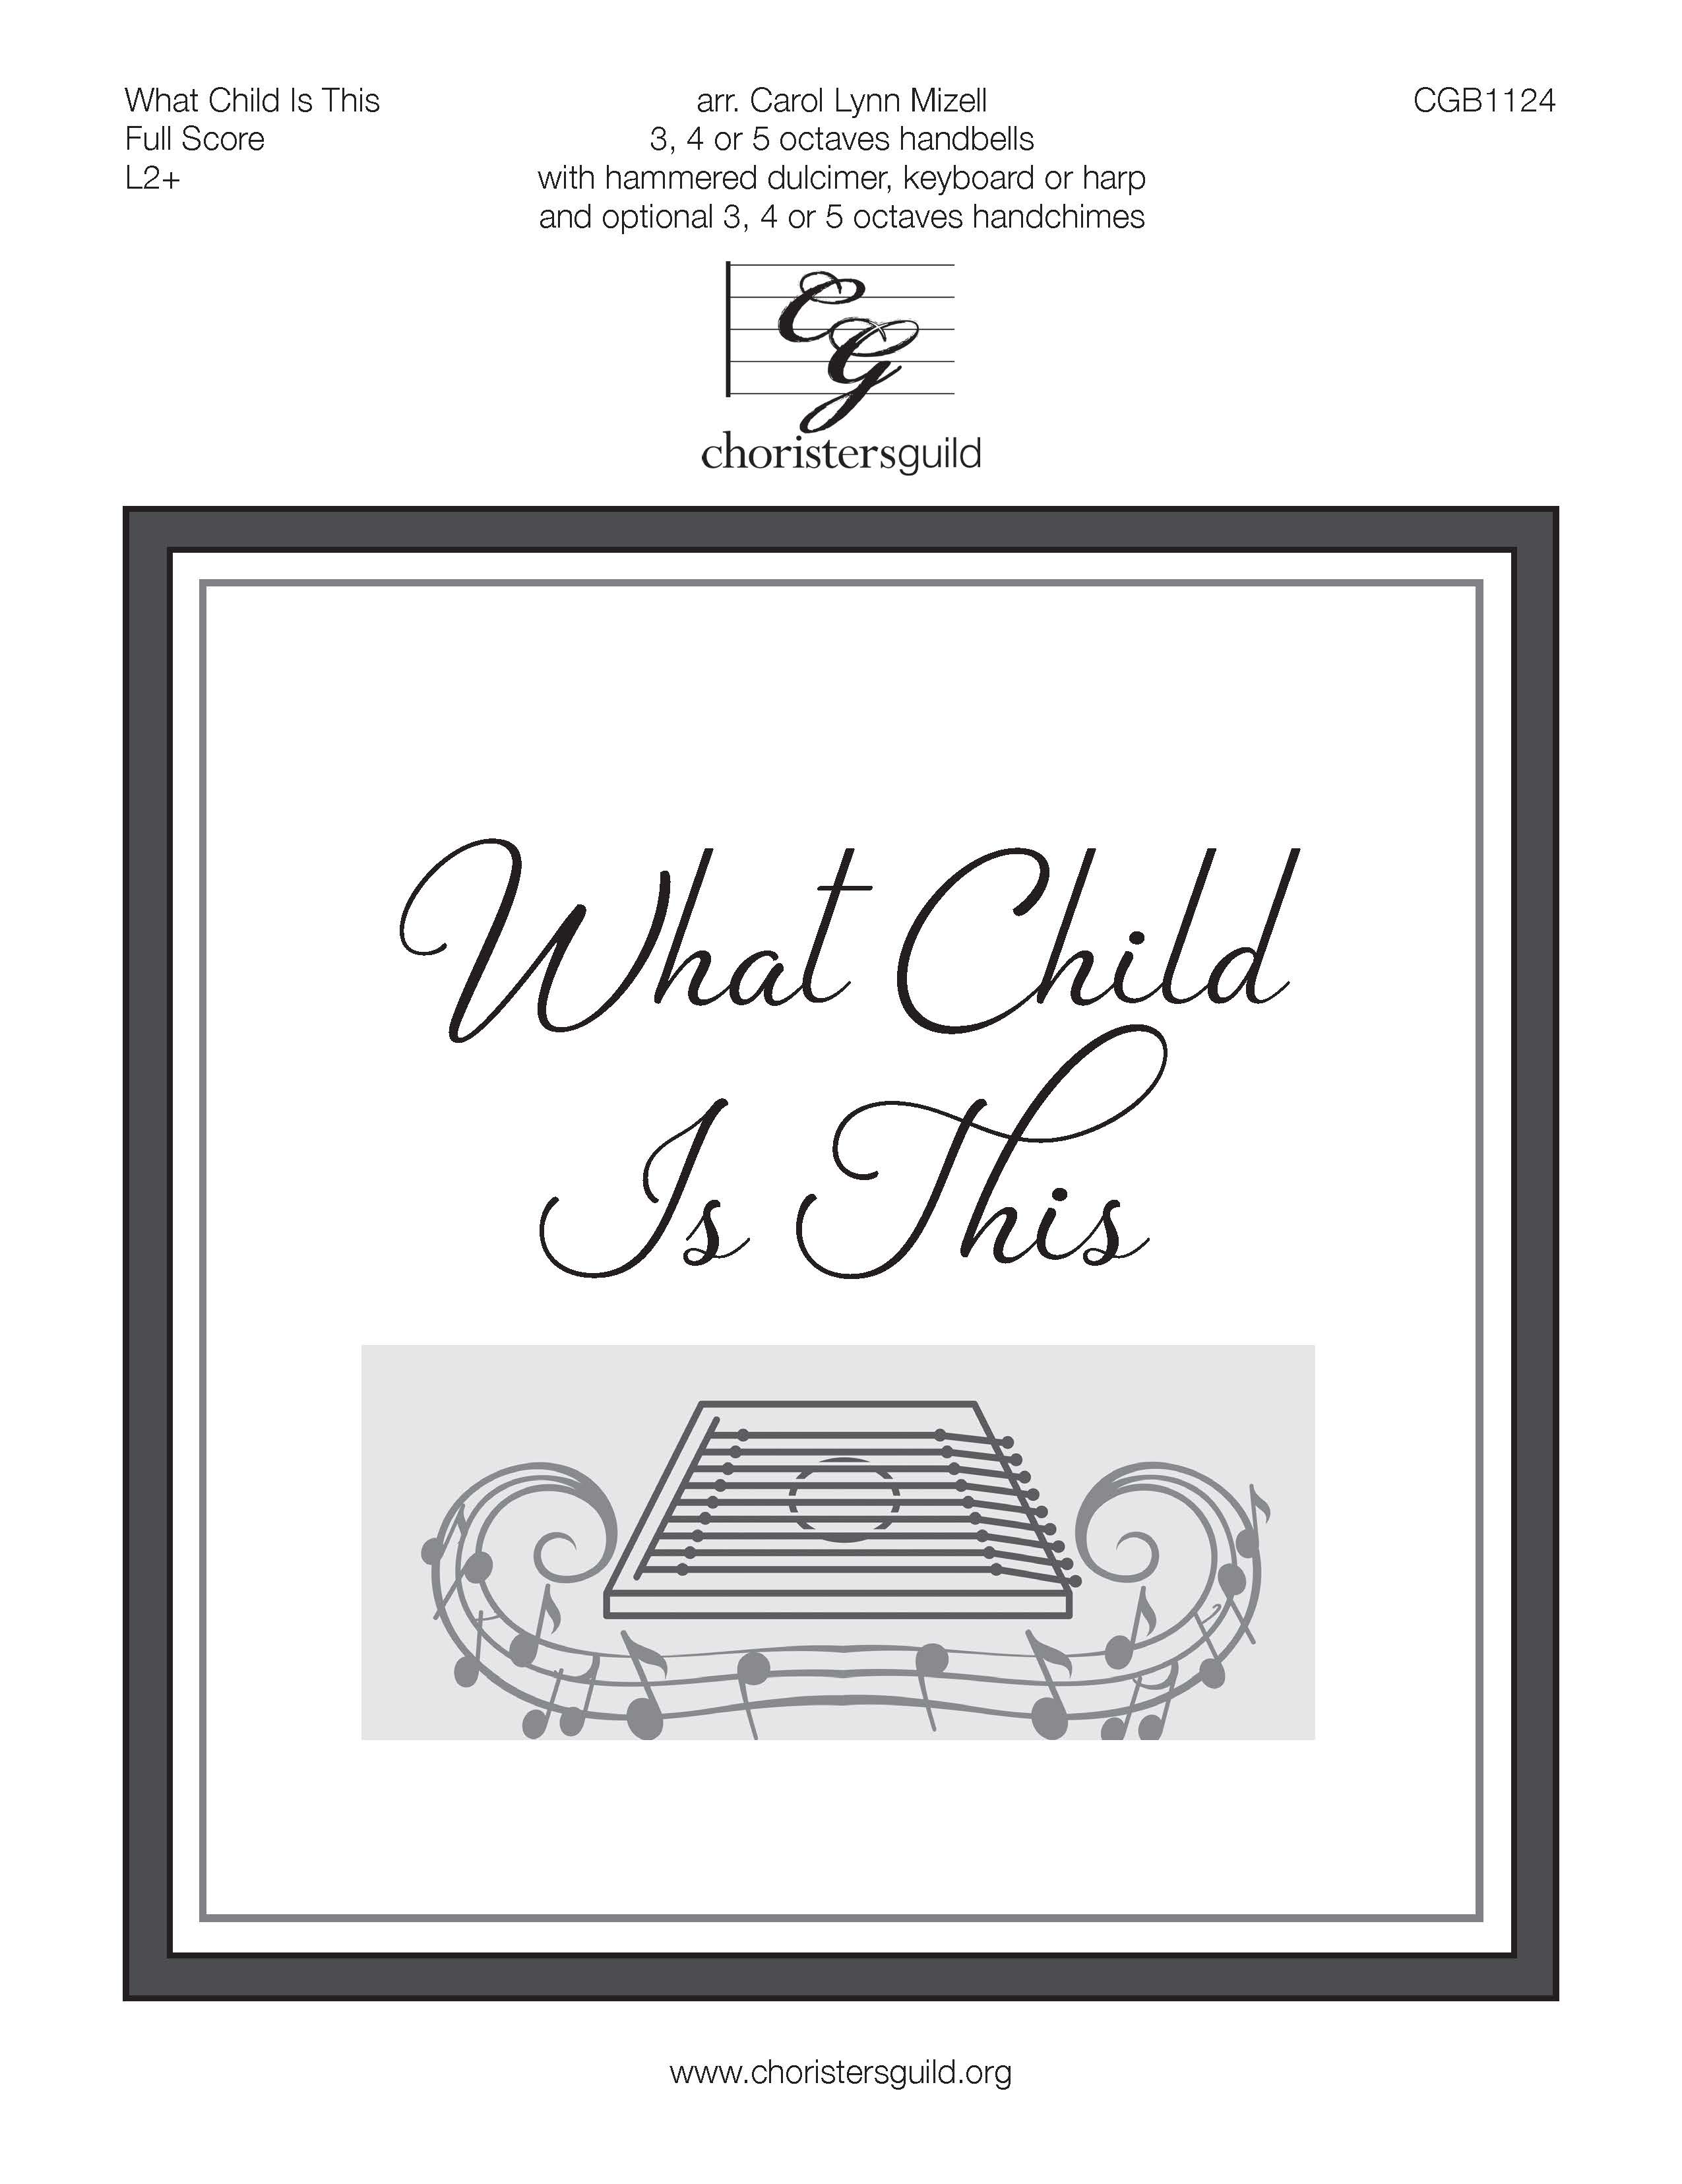 What Child is This - Full Score